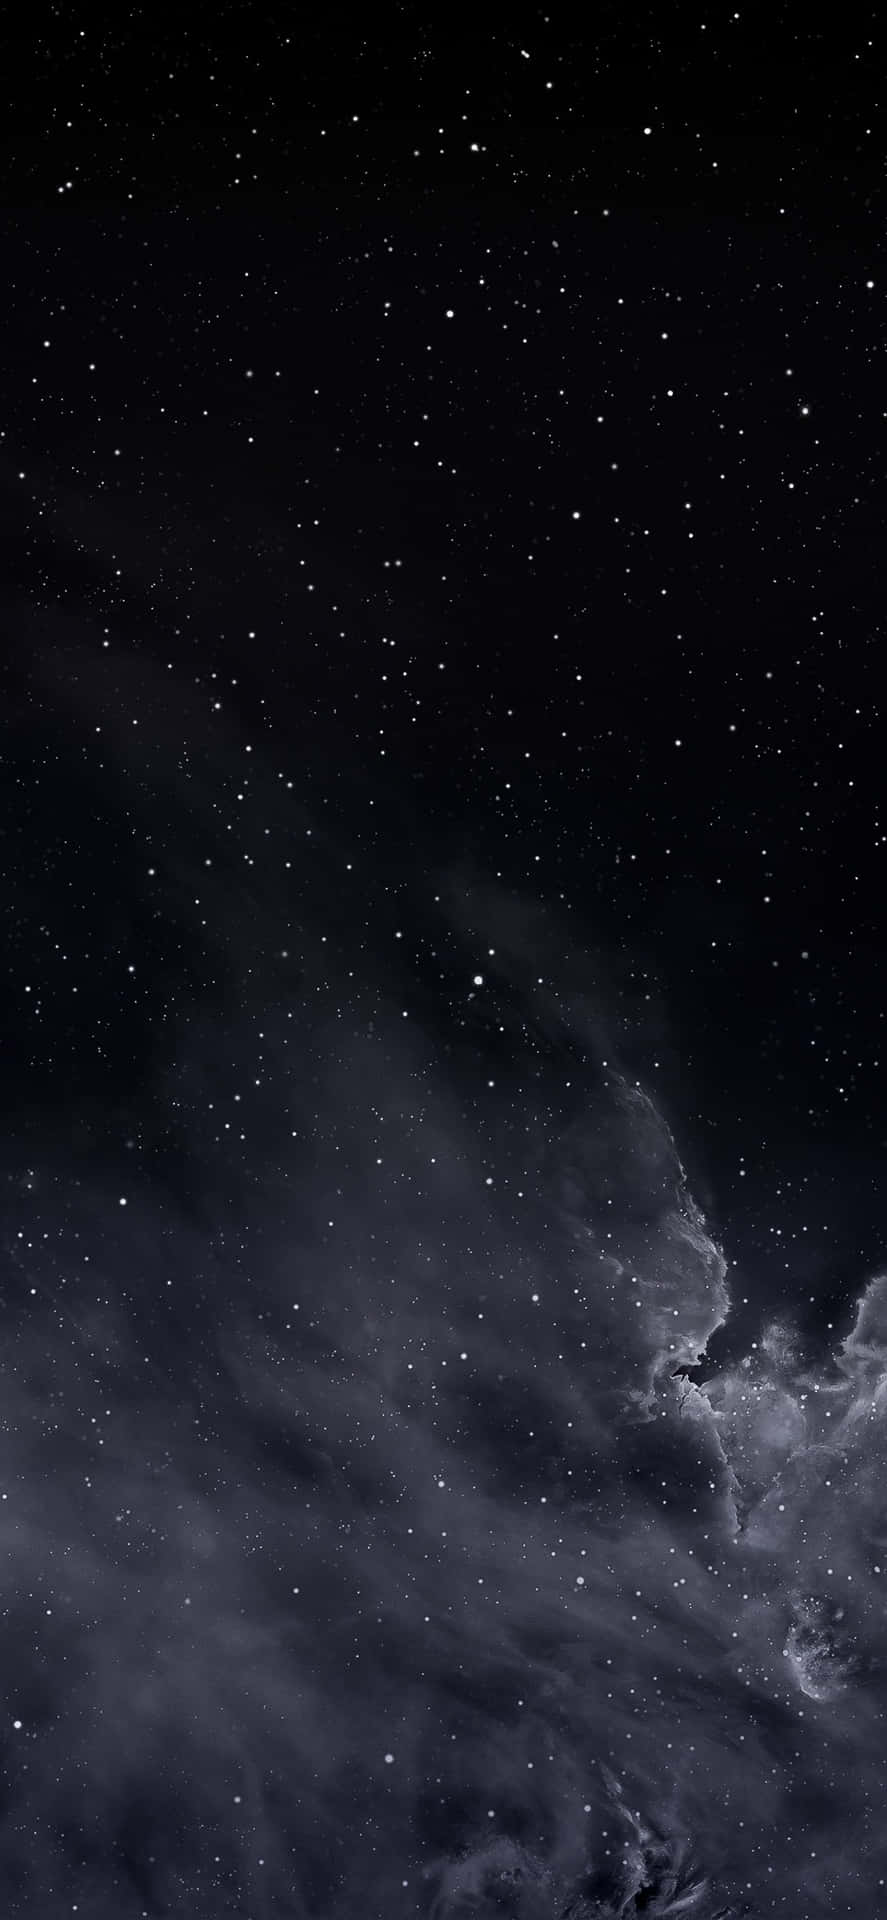 These Bright Stars Wallpaper